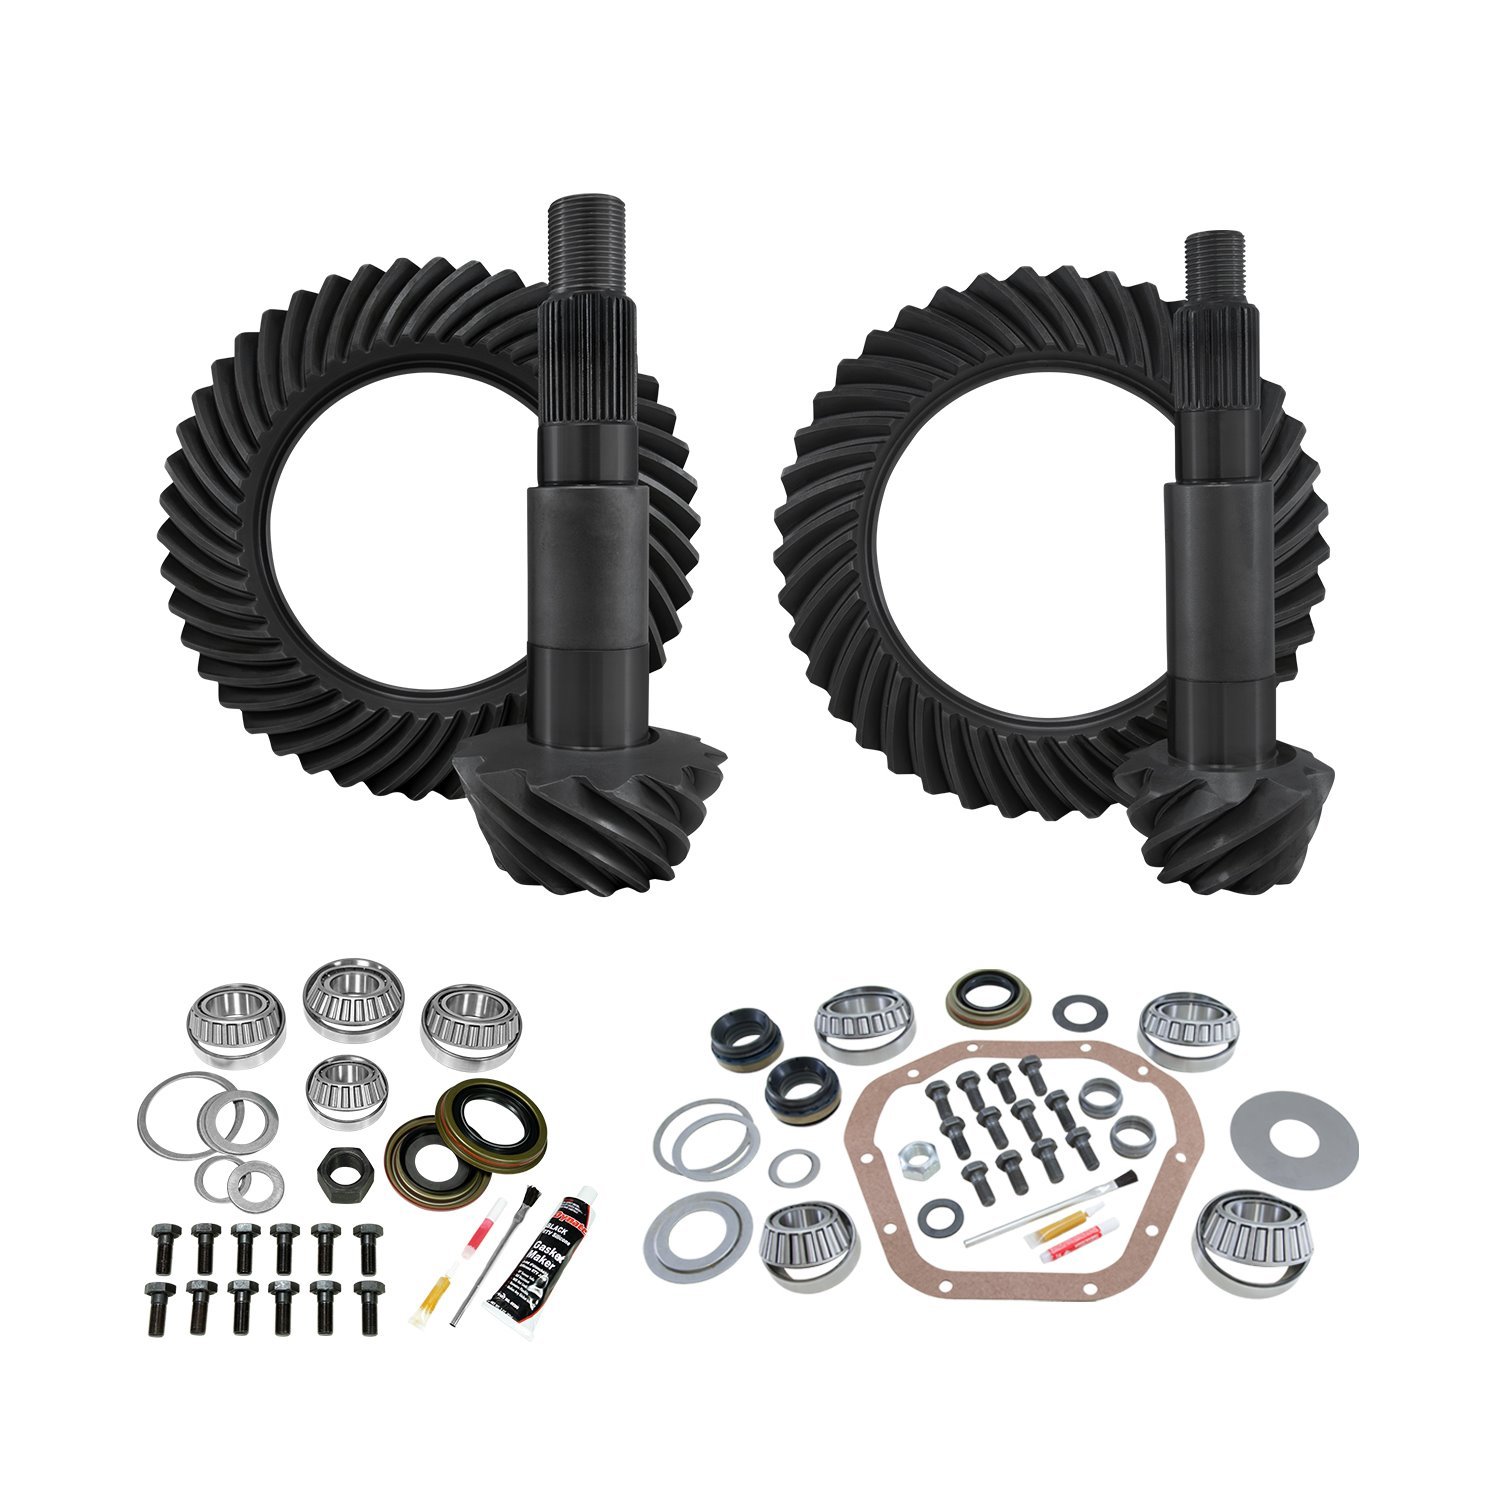 Re-Gear & Install Kit, D60 Reverse/Thick Front, D80 Rear, Ford F350, 4.56